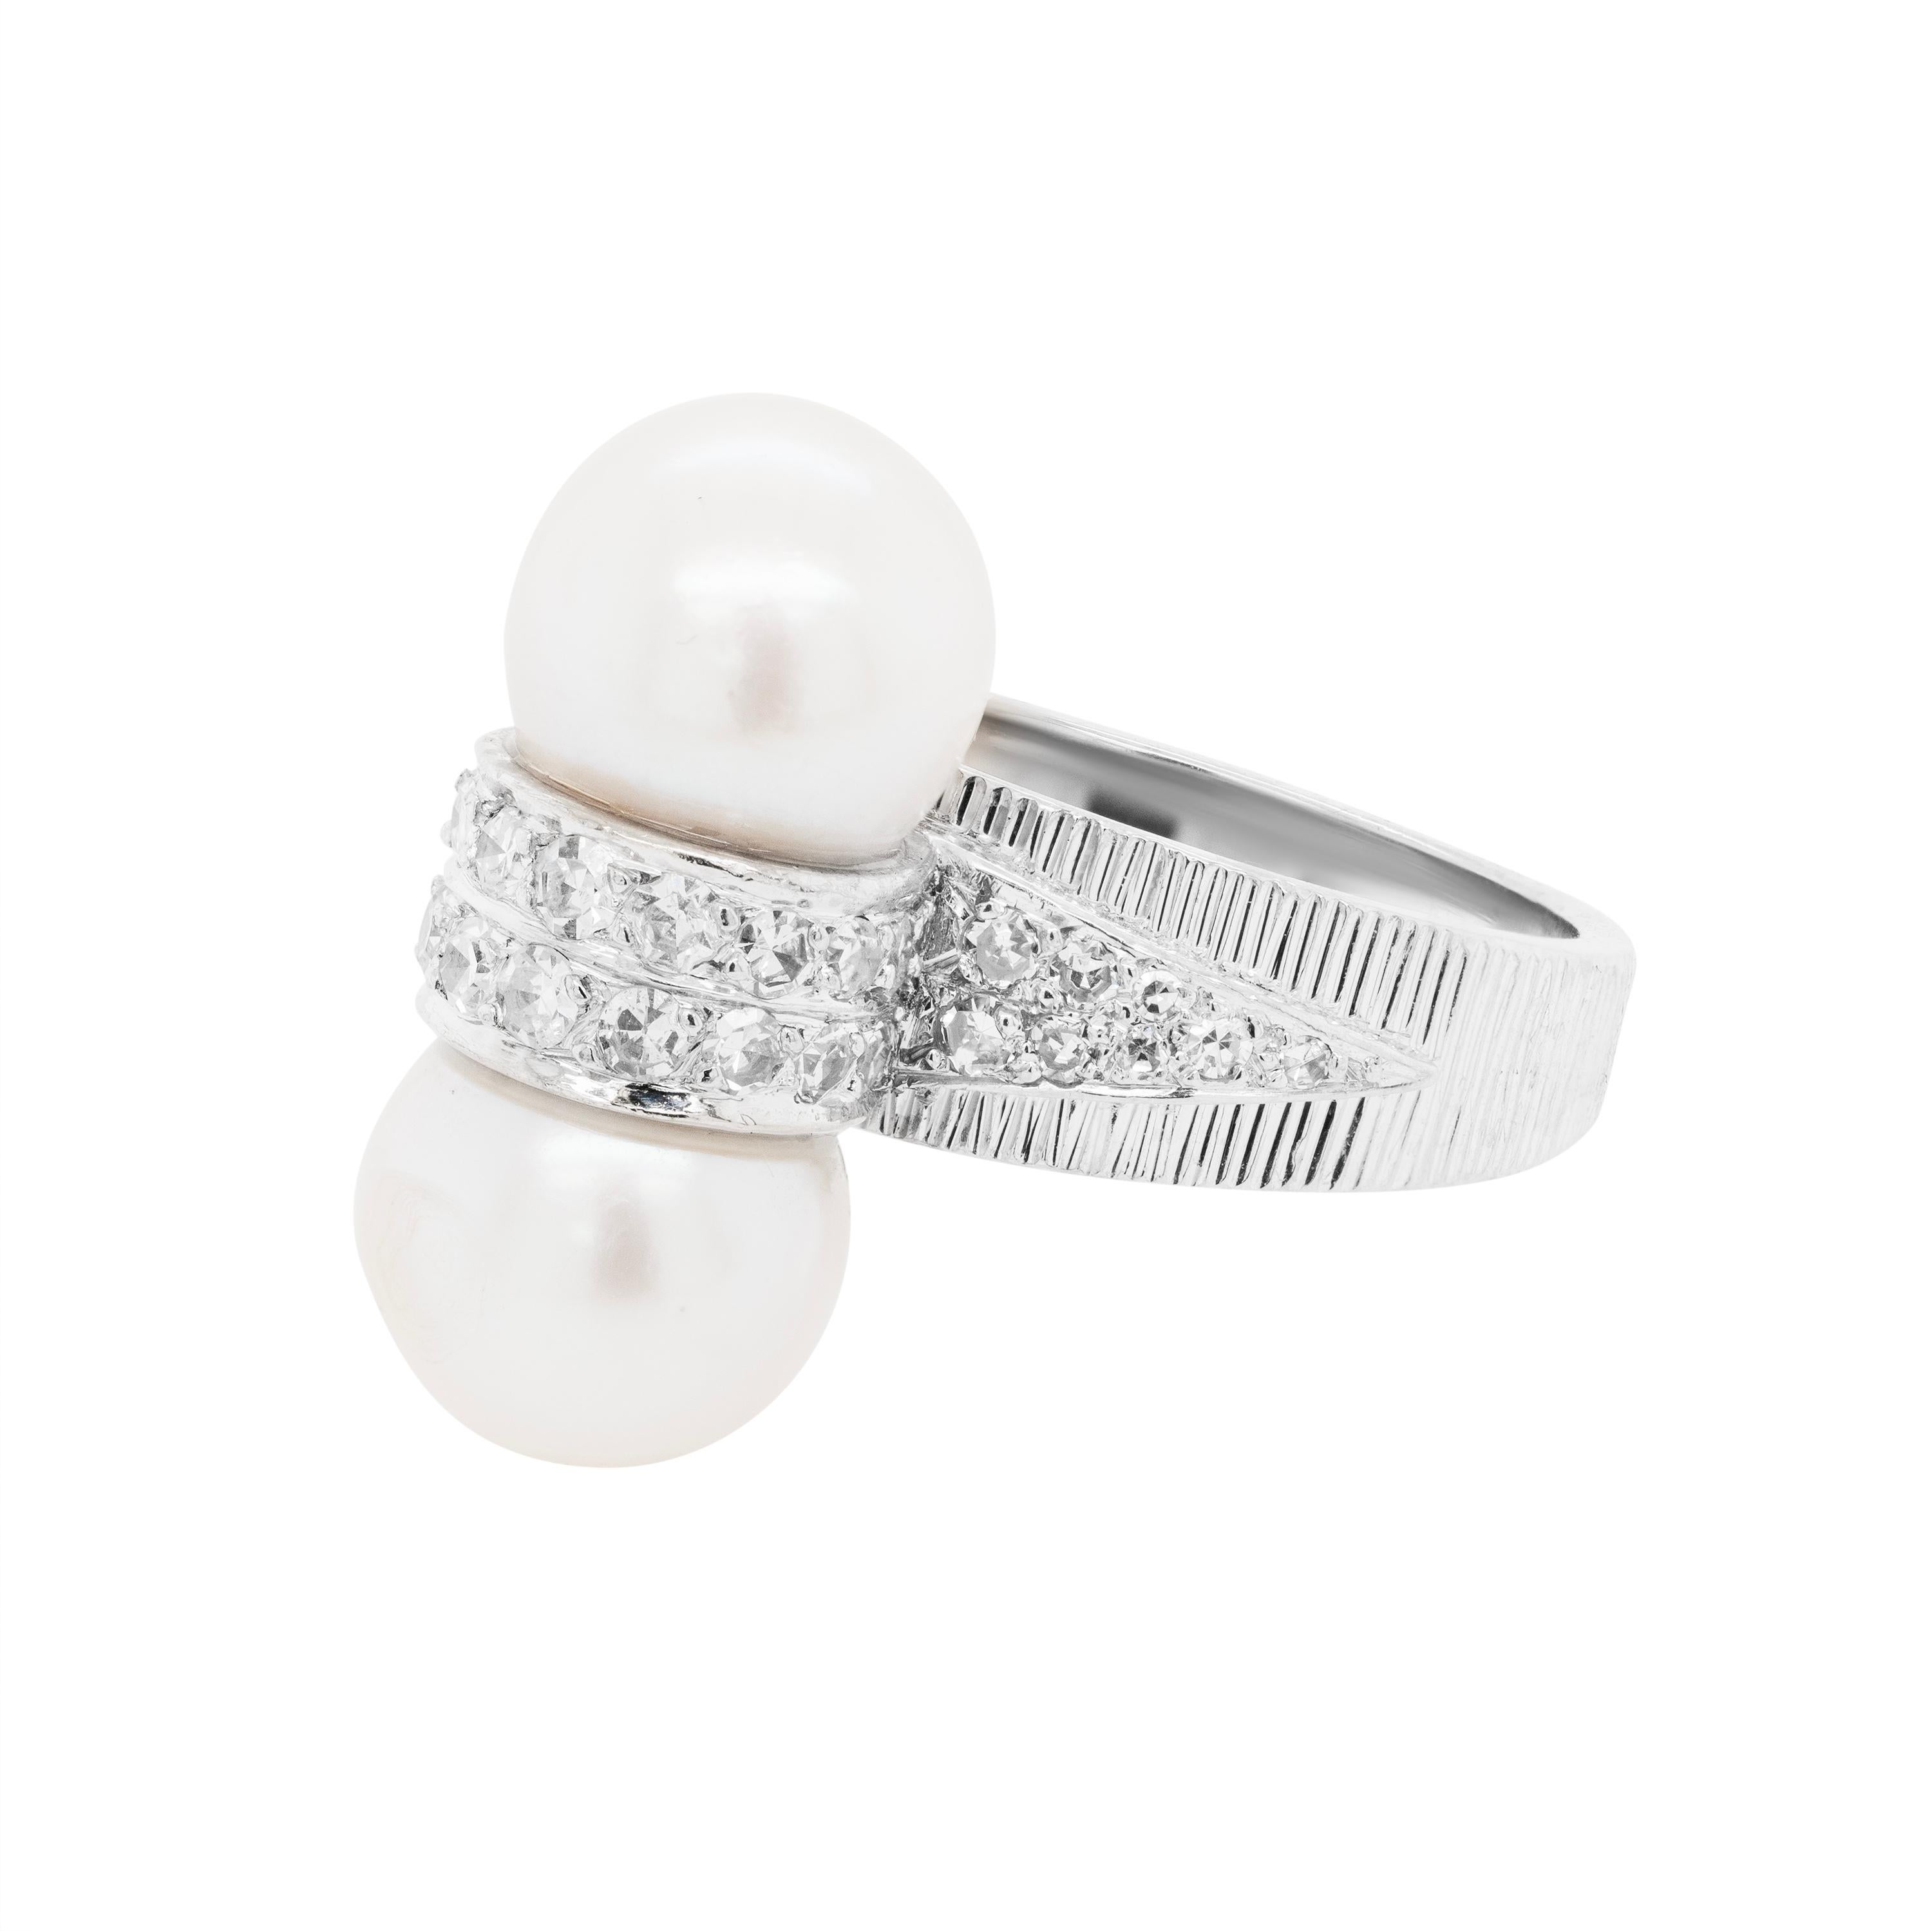 Crafted in 18 carat white gold, this vintage ring features a captivating design, combining the elegance of pearls with the brilliance of diamonds. Two cultured pearls adorn this elegant ring, measuring approximately 9mm each, are mounted above and